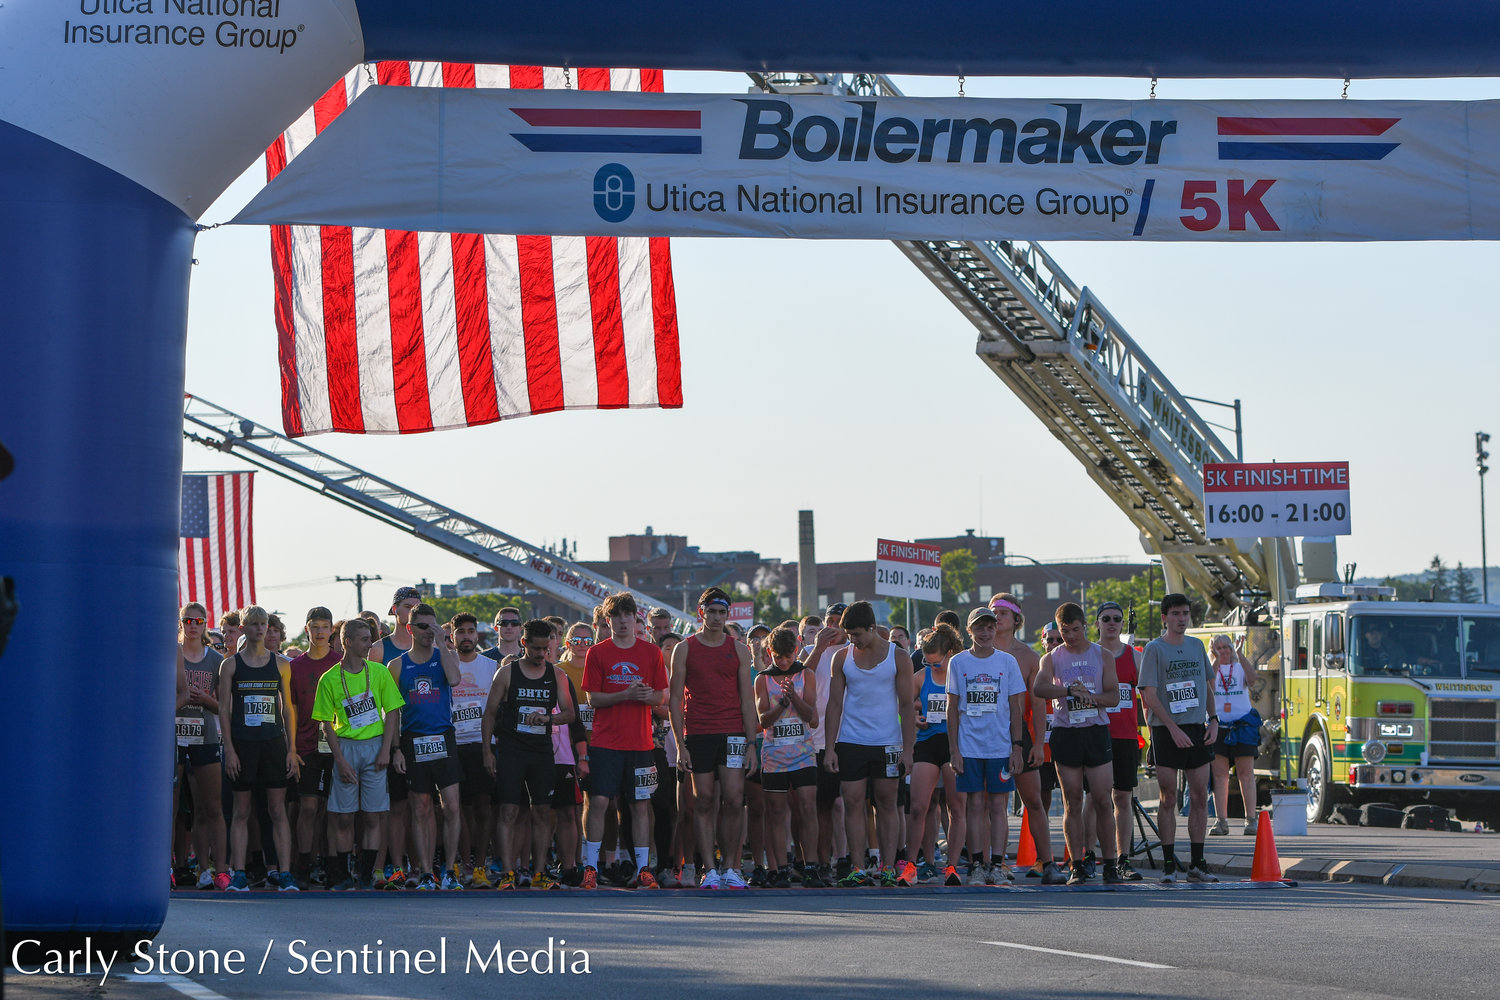 2022 Boilermaker 5K runners prepare to take off from the starting line on Burrstone Road in Utica on Sunday, July 10.